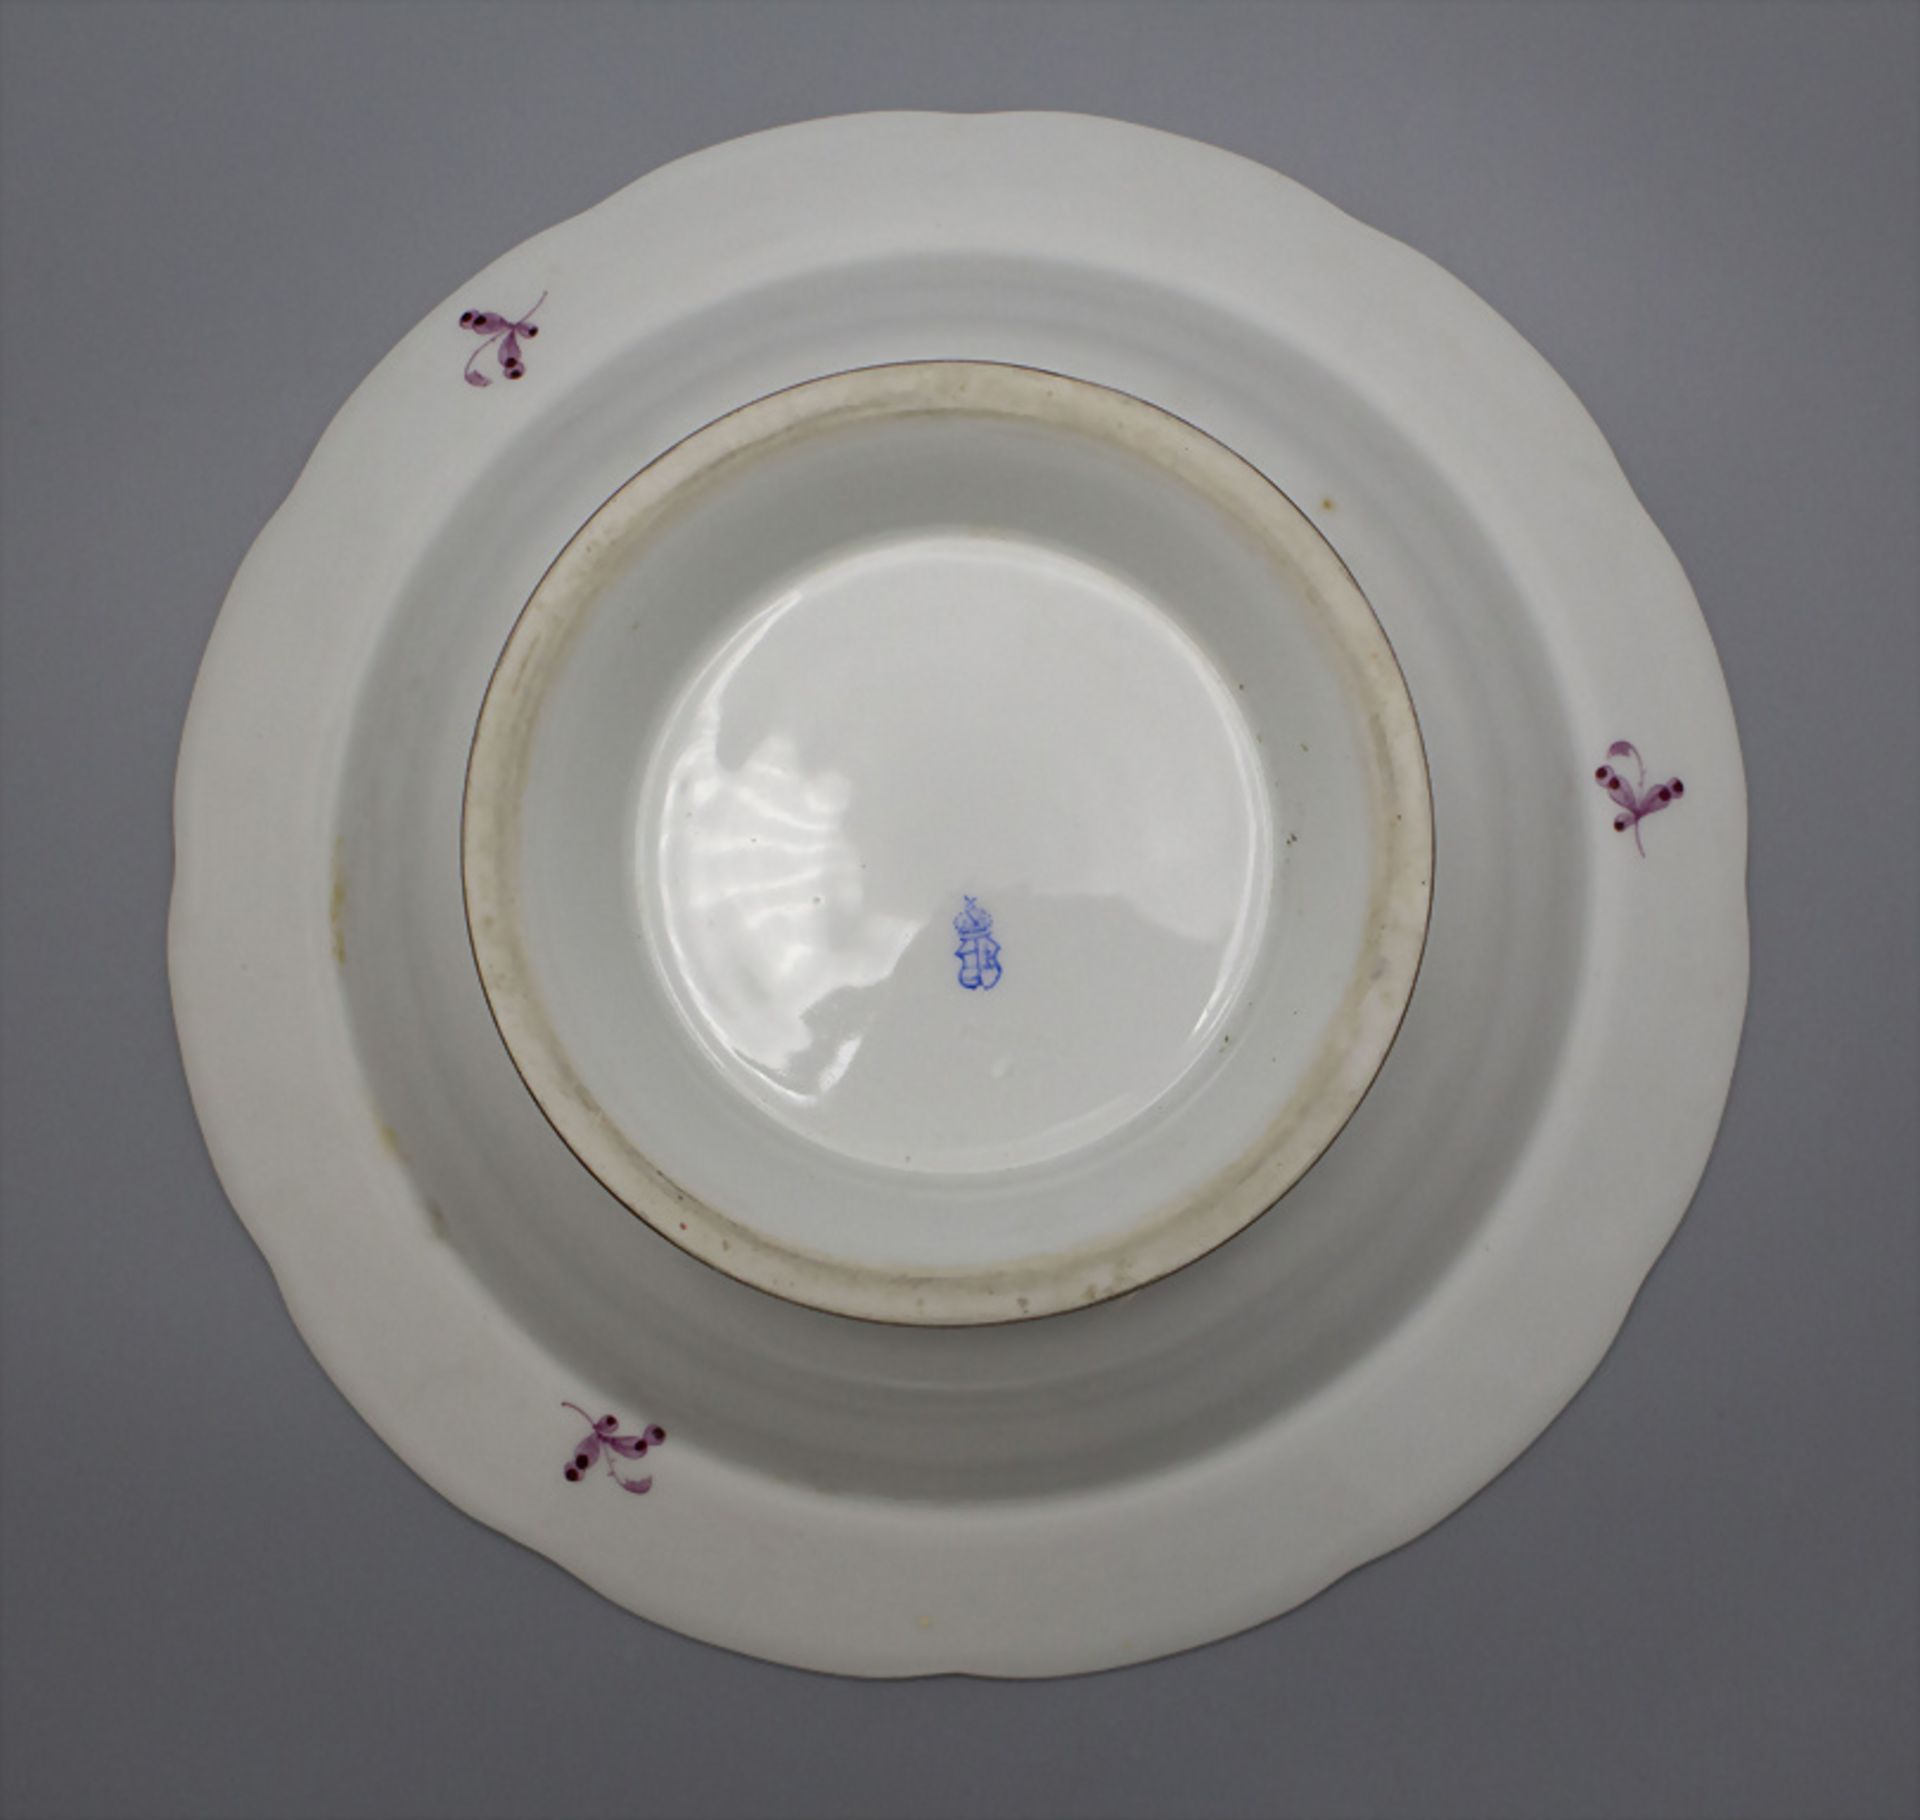 Anbietschale / A serving plate, Herend, Ungarn, 19. Jh. - Image 3 of 5